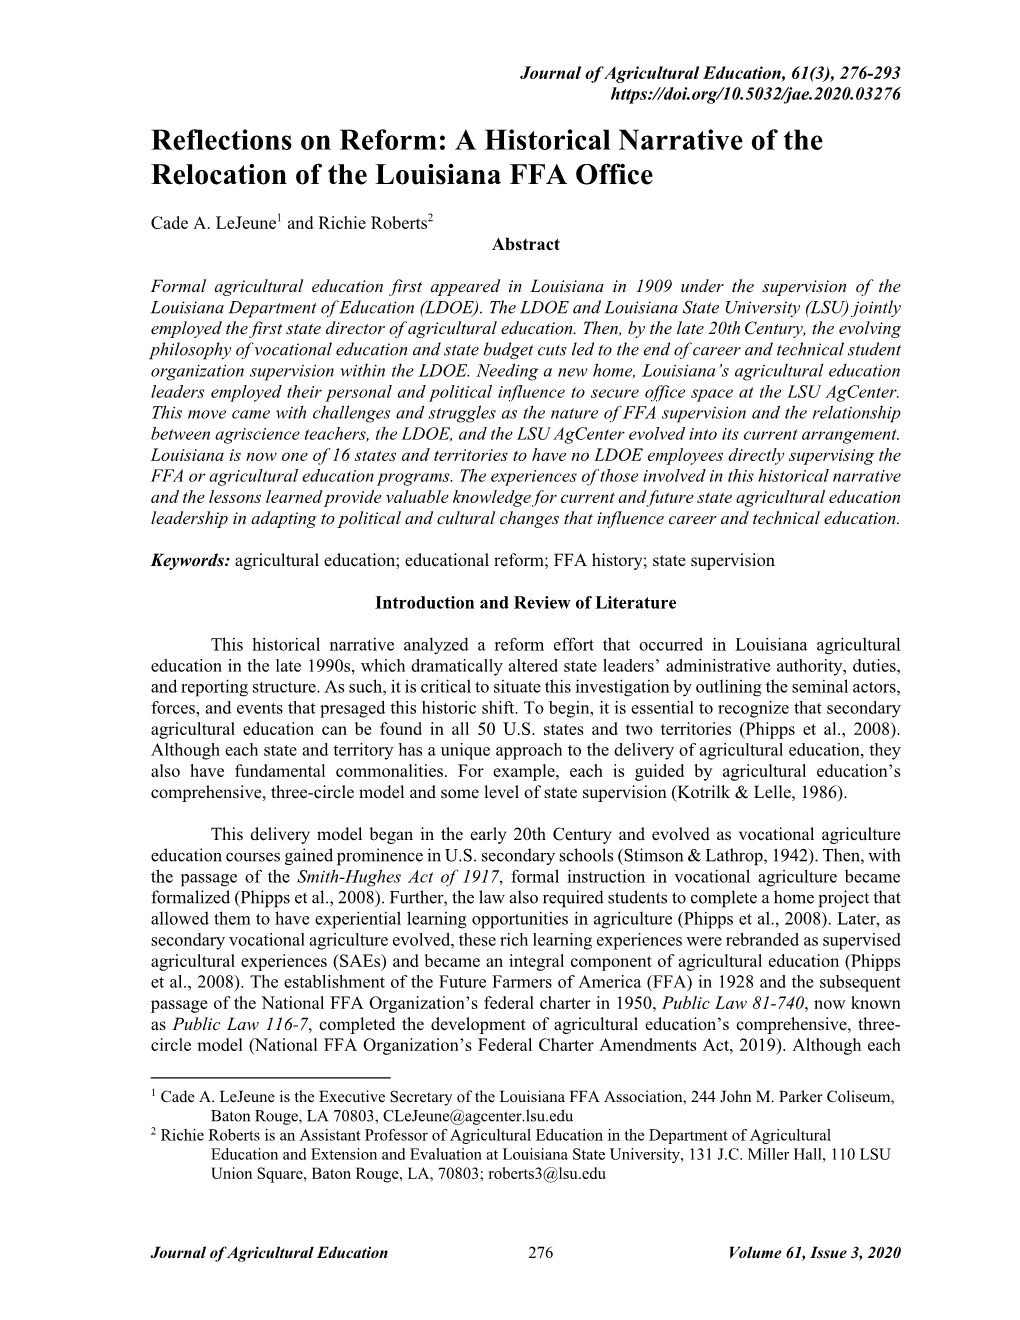 A Historical Narrative of the Relocation of the Louisiana FFA Office